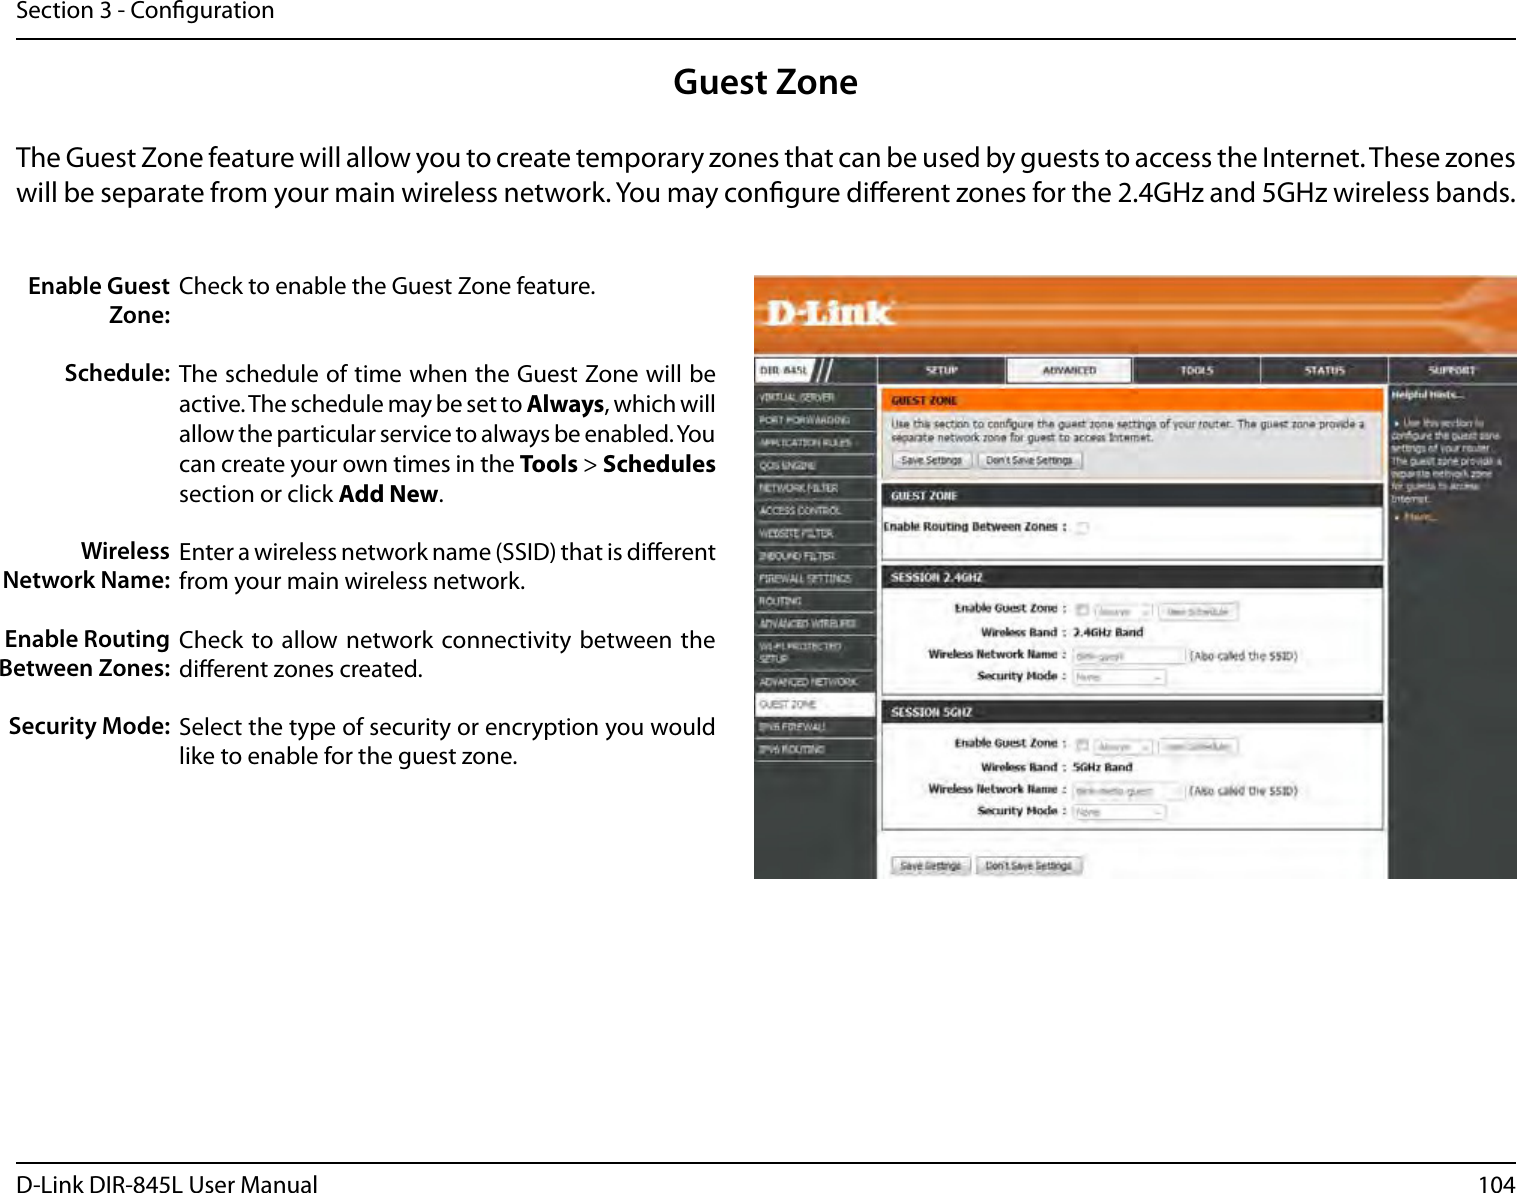 104D-Link DIR-845L User ManualSection 3 - CongurationGuest ZoneCheck to enable the Guest Zone feature. The schedule of time when the Guest Zone will be active. The schedule may be set to Always, which will allow the particular service to always be enabled. You can create your own times in the Tools &gt; Schedules section or click Add New.Enter a wireless network name (SSID) that is dierent from your main wireless network.Check to allow network connectivity  between the dierent zones created. Select the type of security or encryption you would like to enable for the guest zone.  Enable Guest Zone:Schedule:Wireless Network Name:Enable Routing Between Zones:Security Mode:The Guest Zone feature will allow you to create temporary zones that can be used by guests to access the Internet. These zones will be separate from your main wireless network. You may congure dierent zones for the 2.4GHz and 5GHz wireless bands.